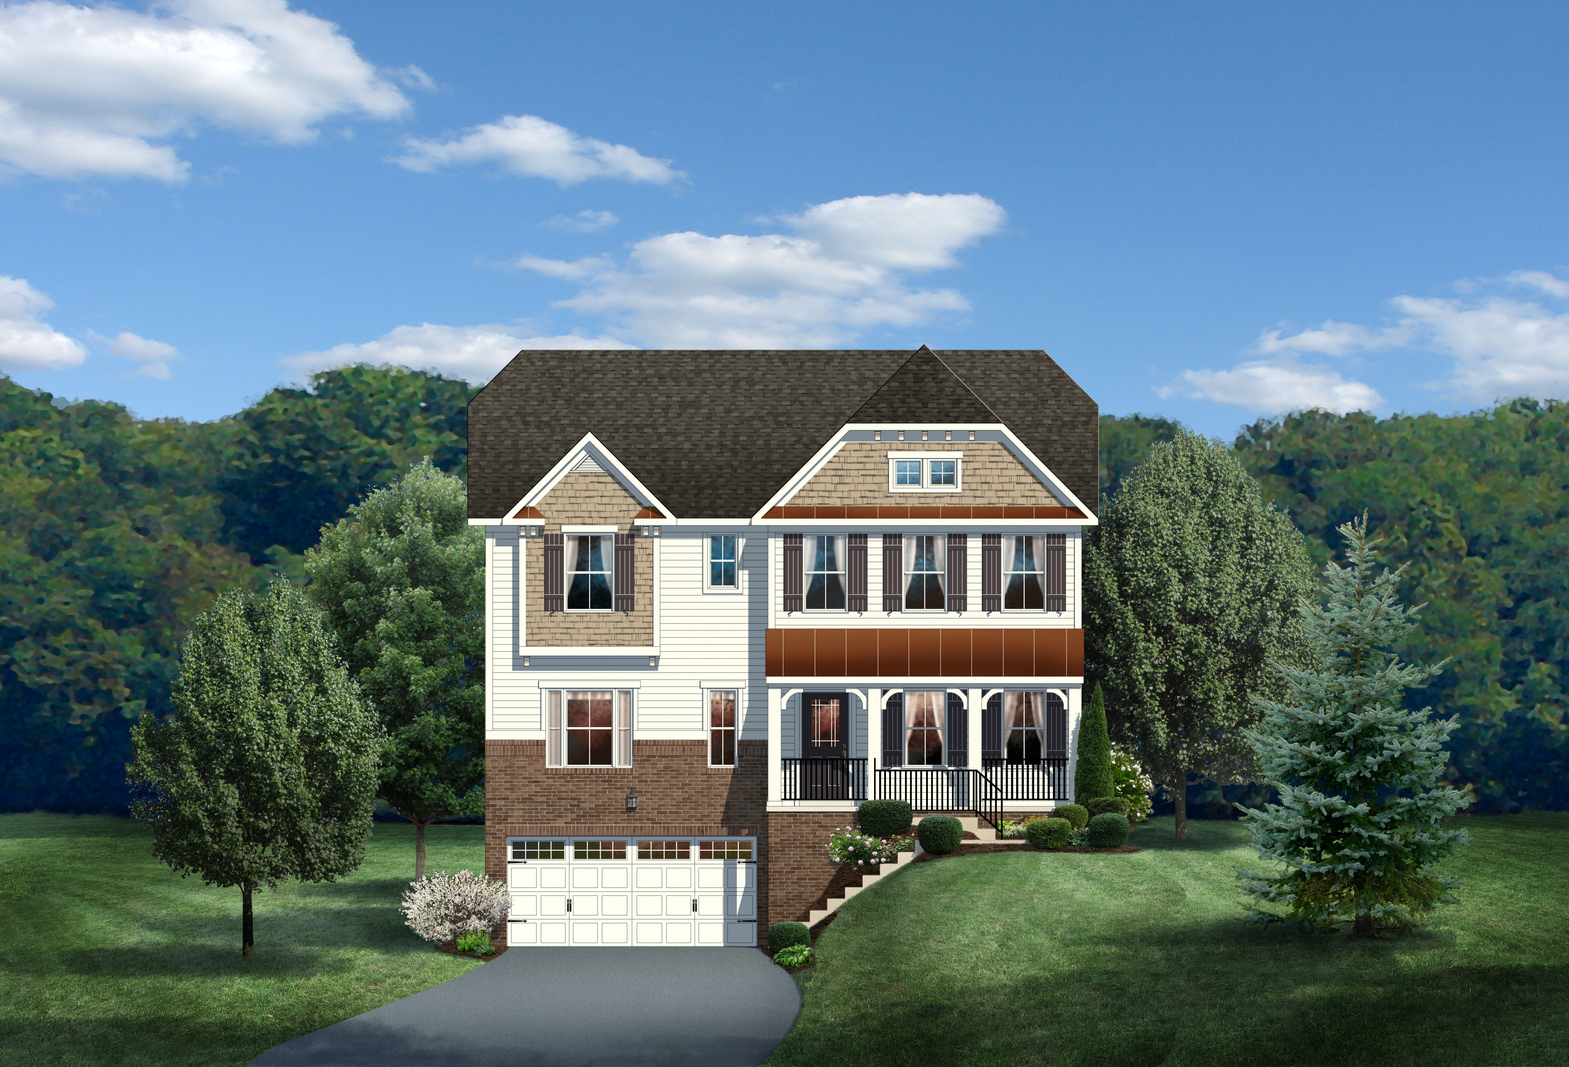 New Foxchapel Home Model for sale at Potomac Shores Single